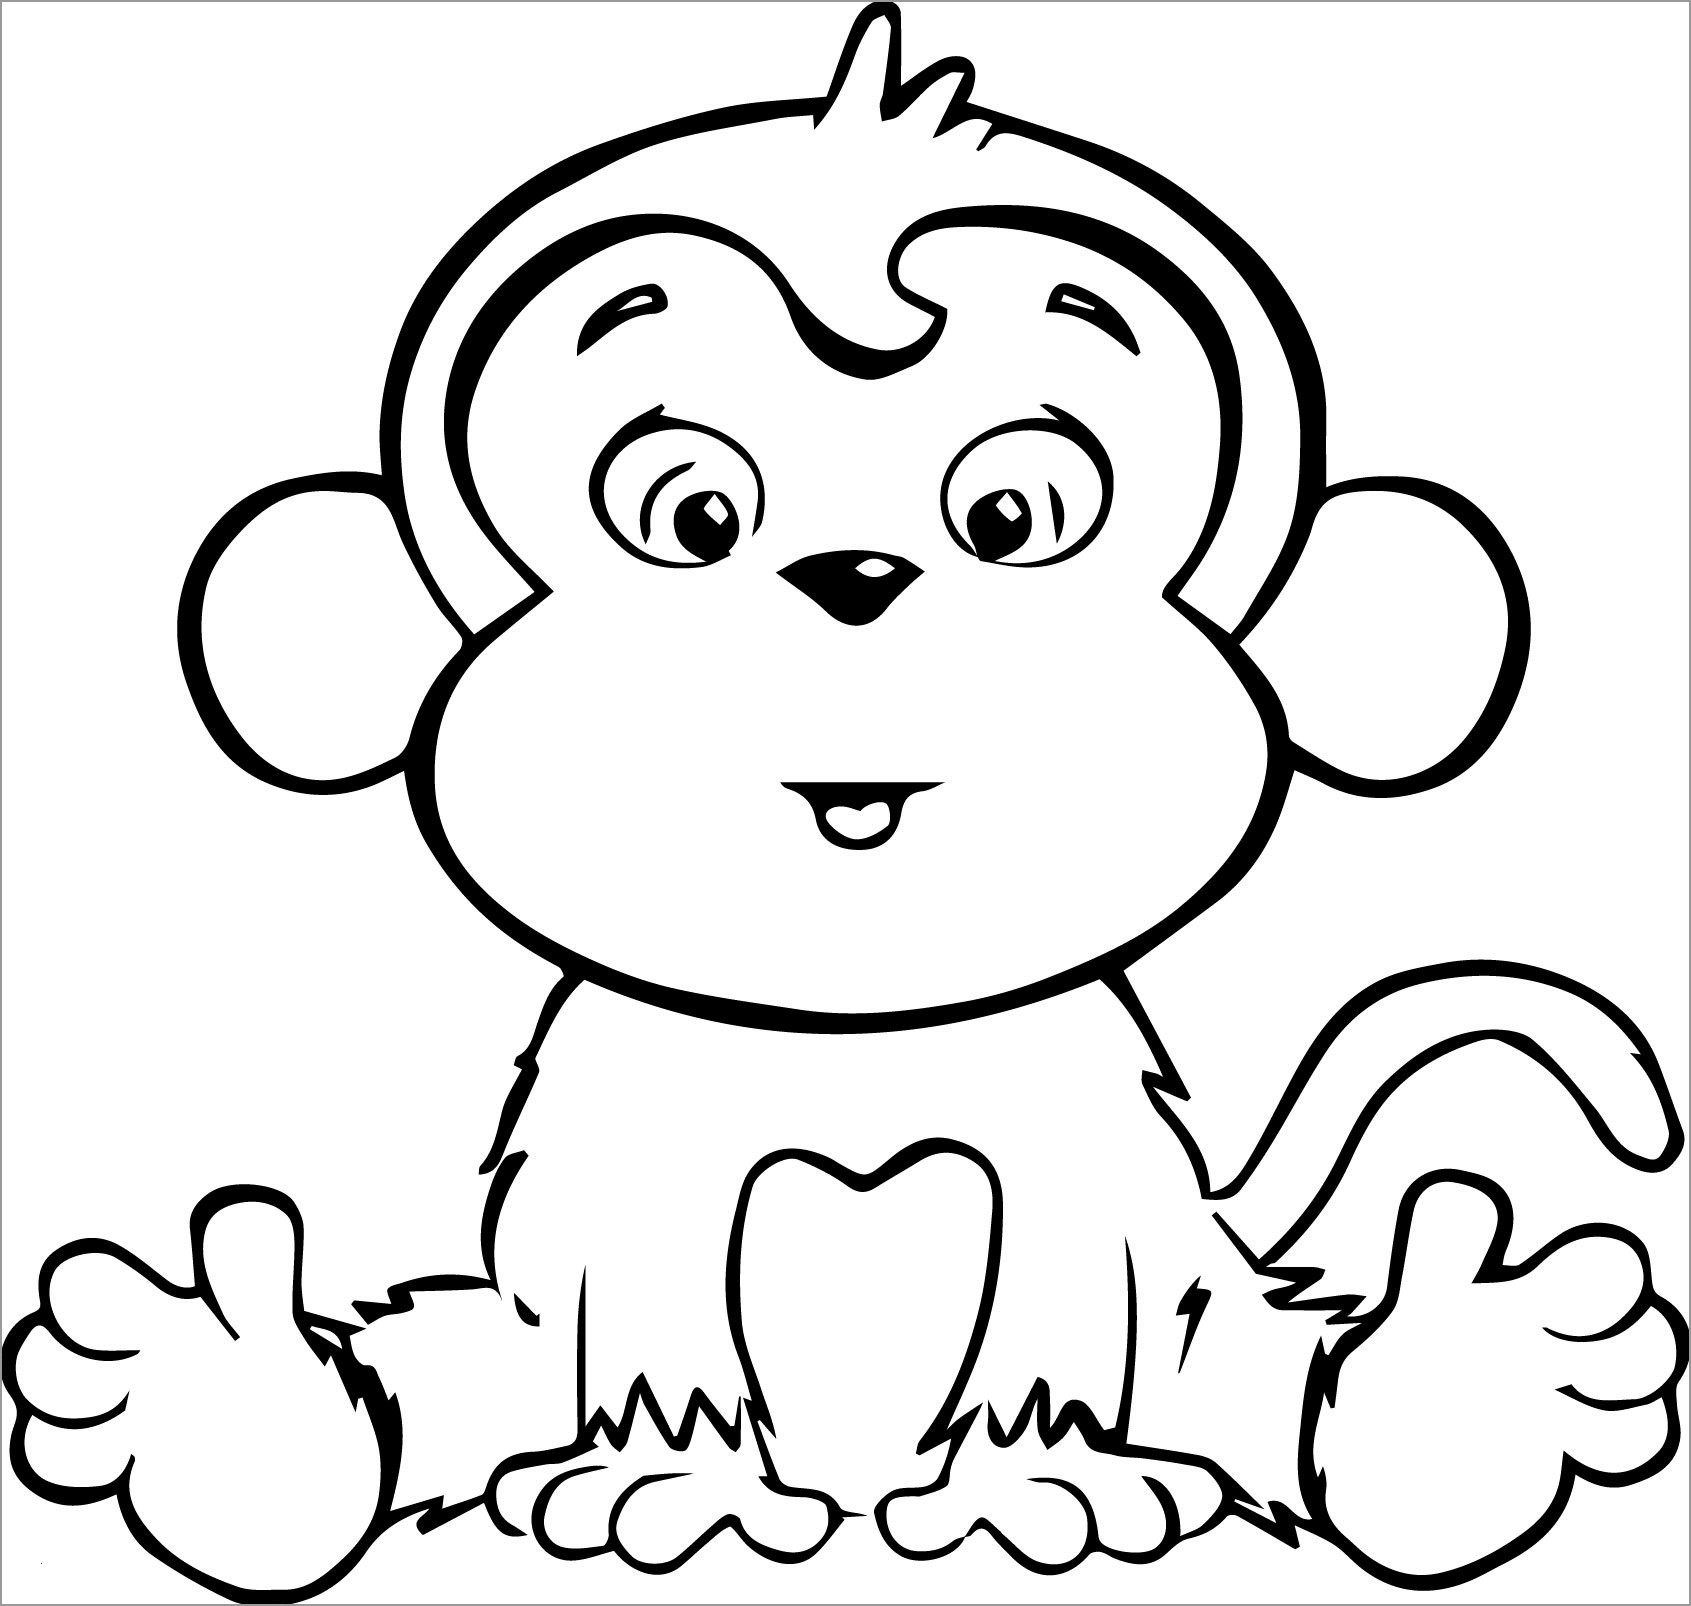 Baby Monkey Coloring Page   ColoringBay